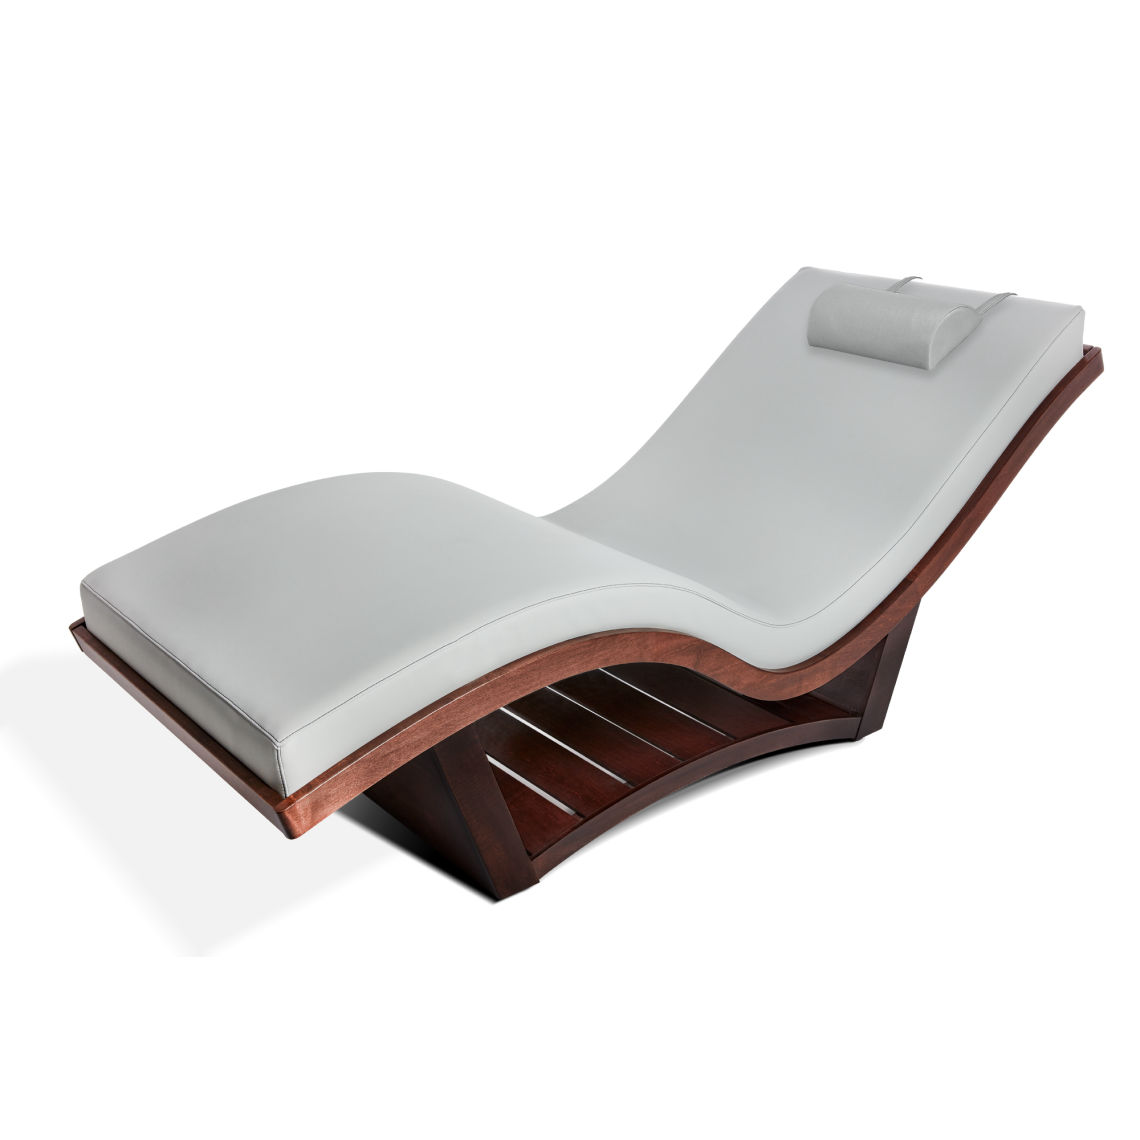 NuWave S Lounger with Replaceable Mattress